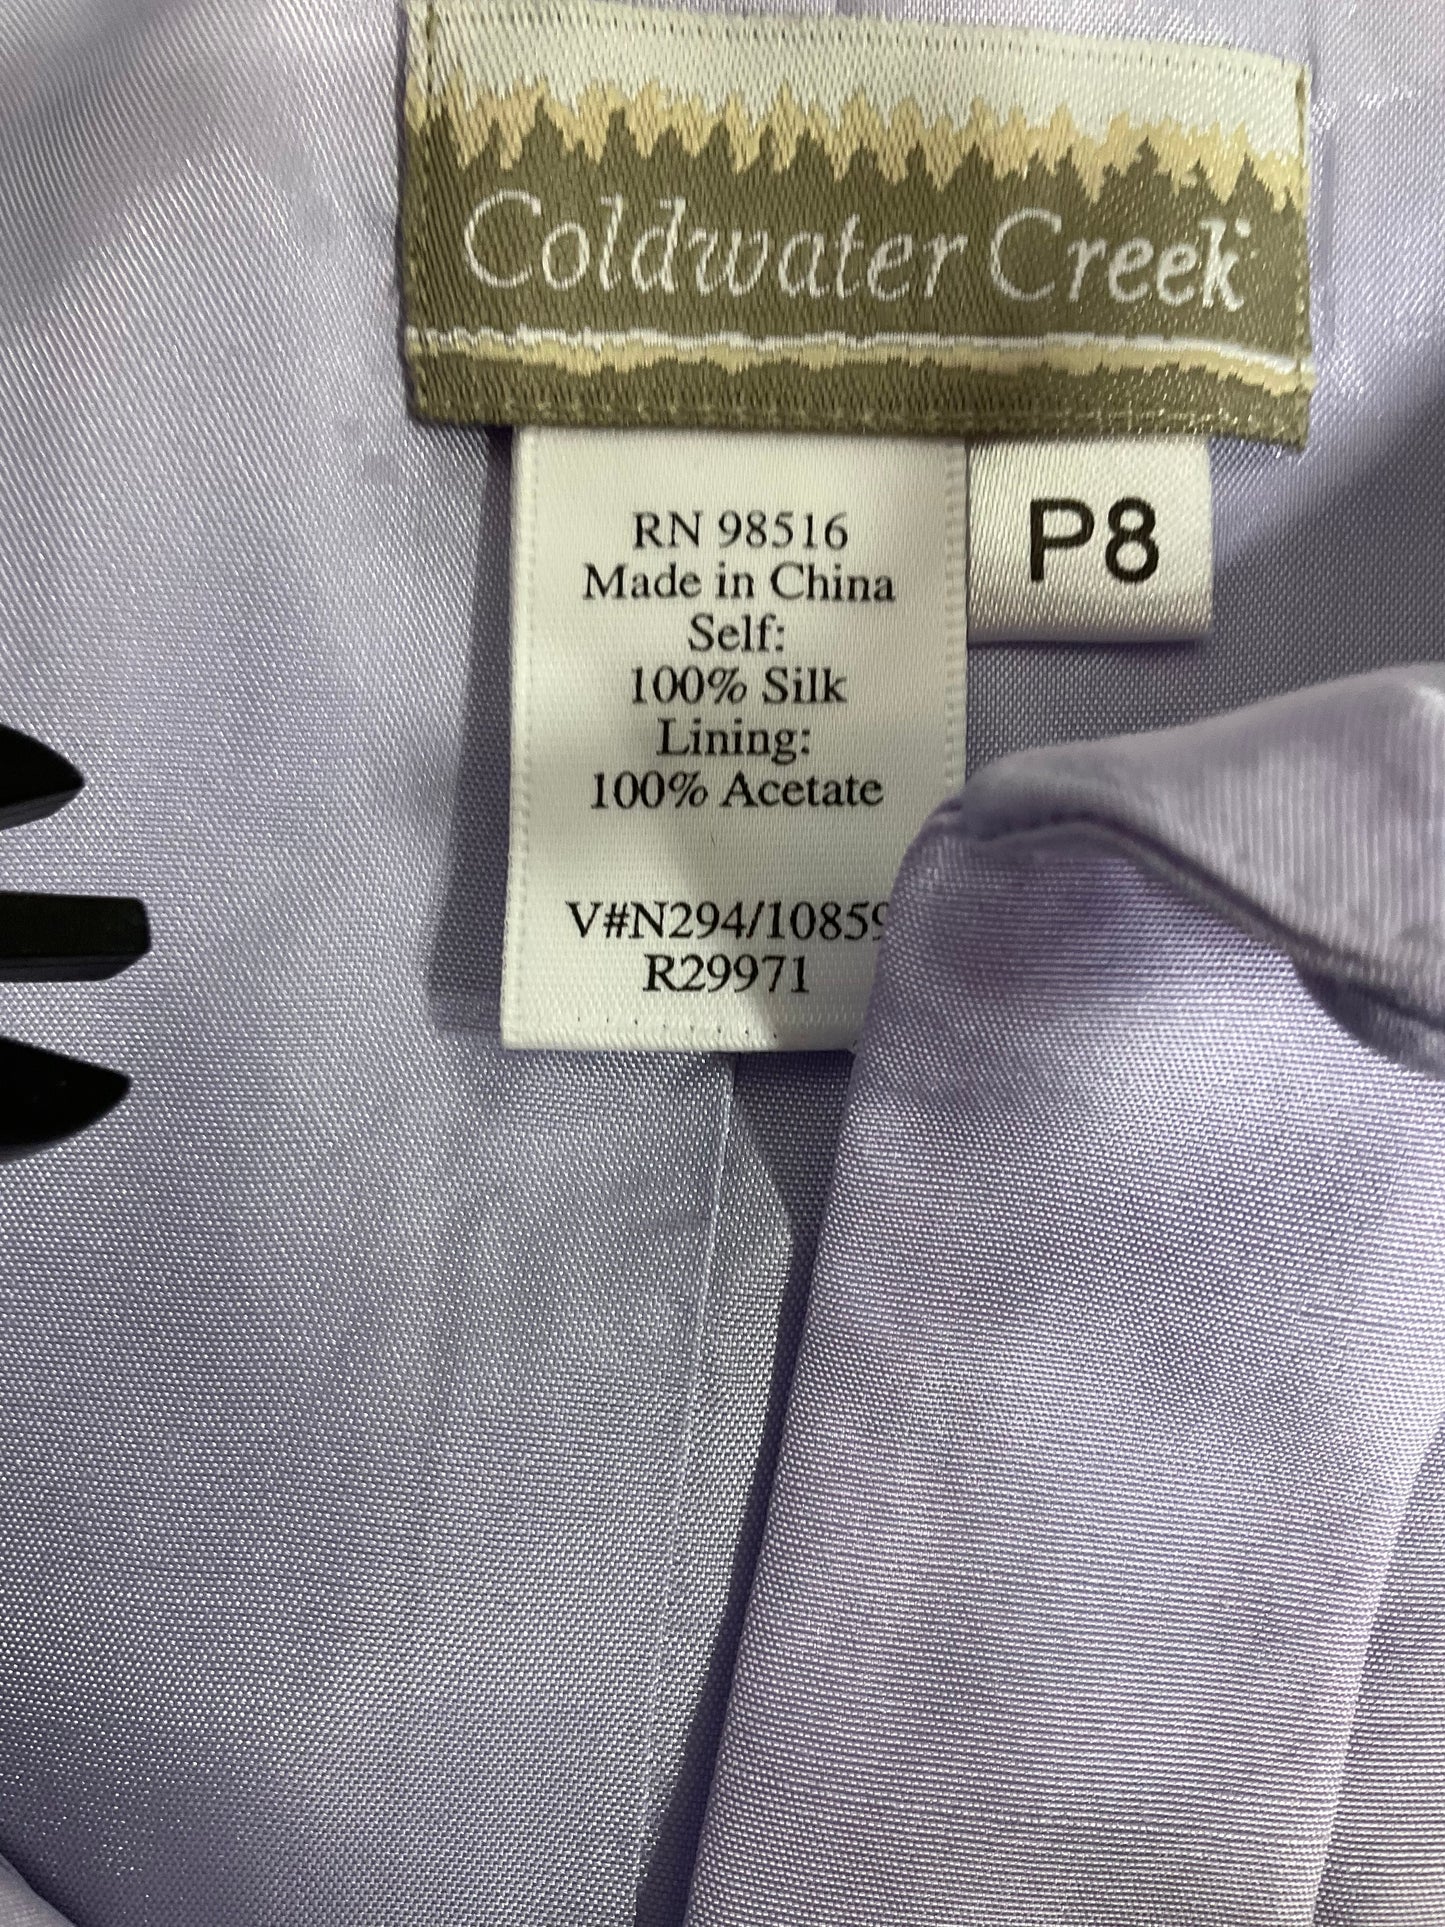 Dress Casual Short By Coldwater Creek  Size: 8